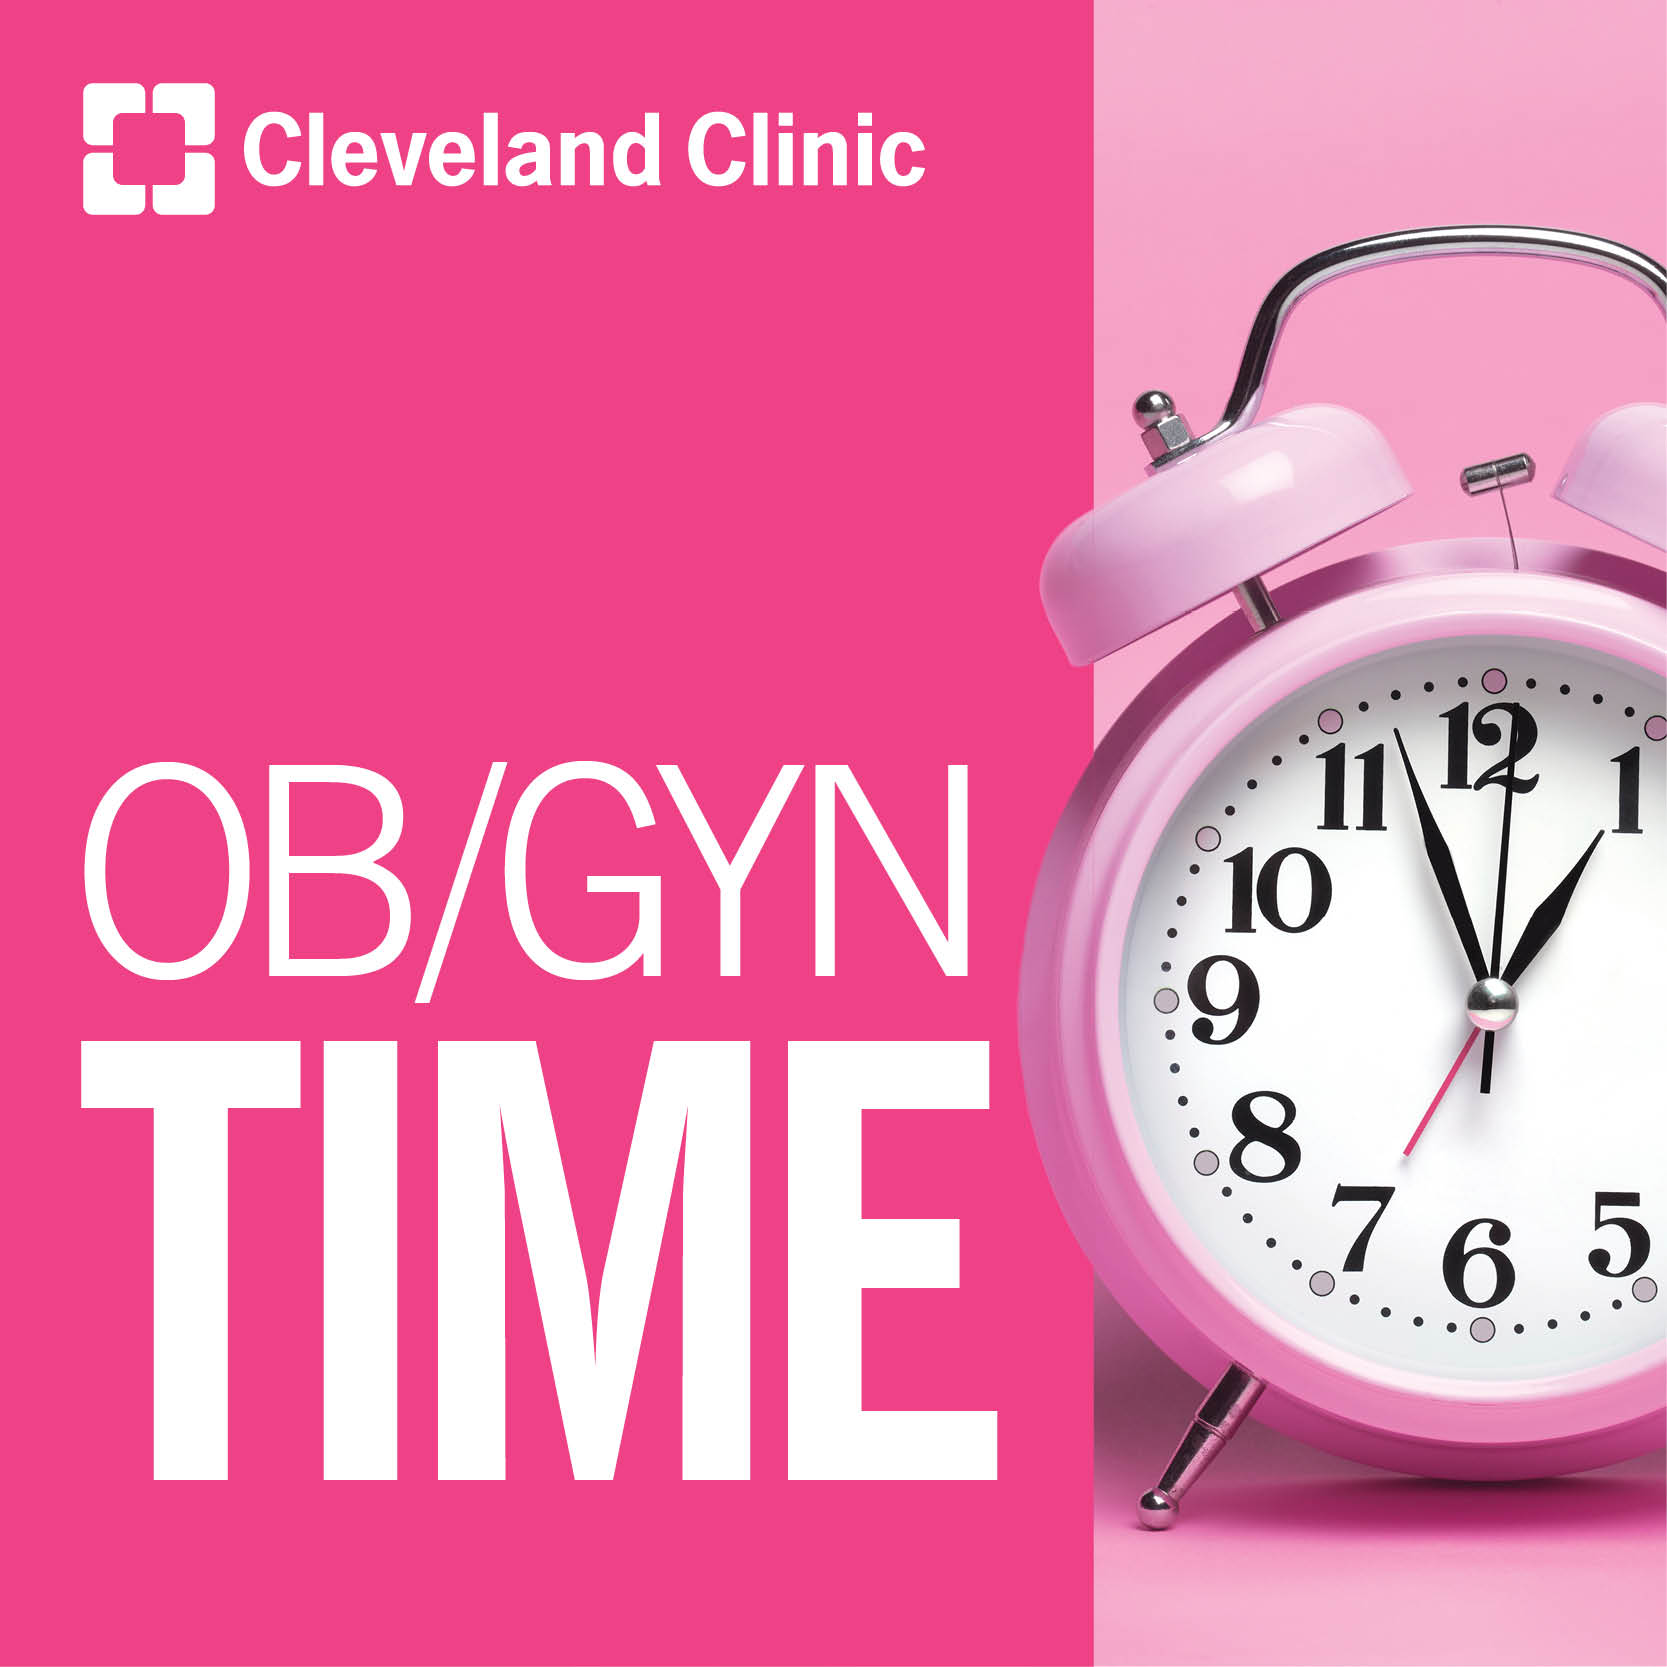 https://my.clevelandclinic.org/-/scassets/images/org/podcast-images/ob-gyn-social-graphic.jpg